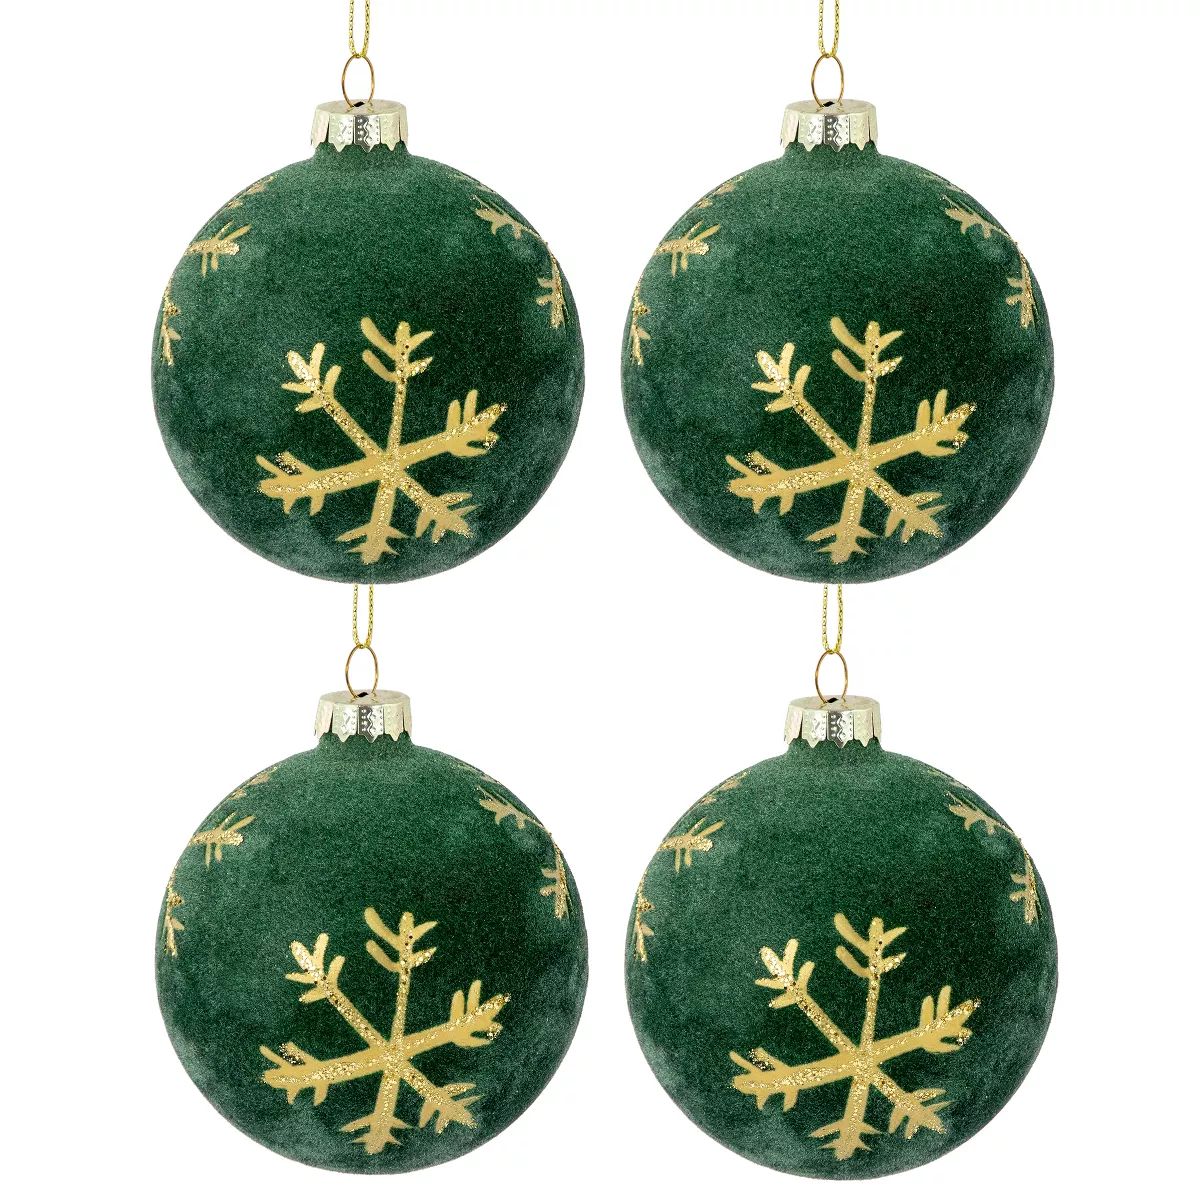 Northlight 4ct Green Velvet Glass Christmas Ball Ornaments with Gold Snowflakes 3" (80mm) | Target